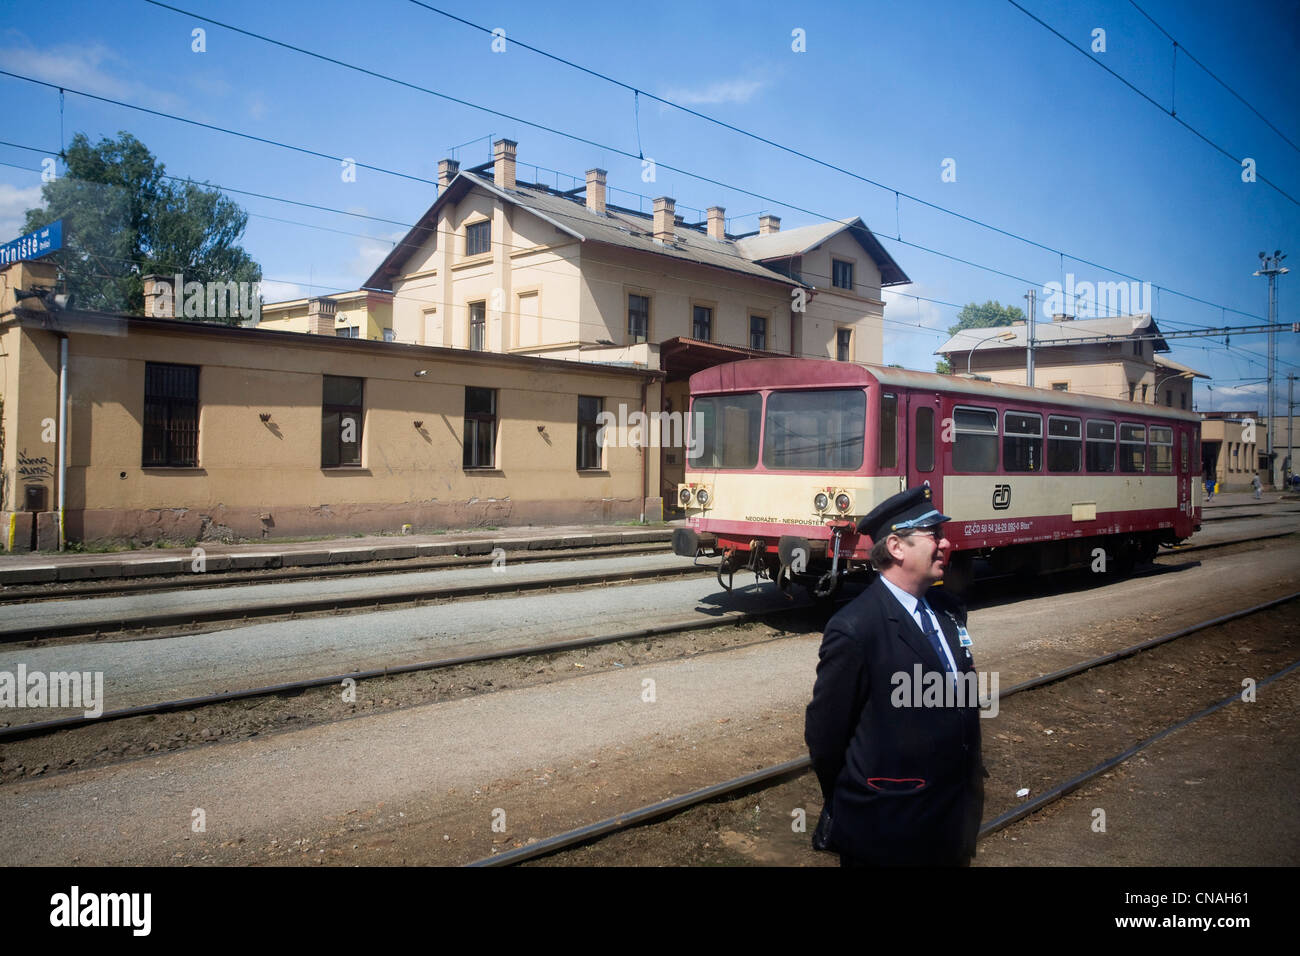 Czech Republic, Prague, station on the line linking Wroclaw Stock Photo